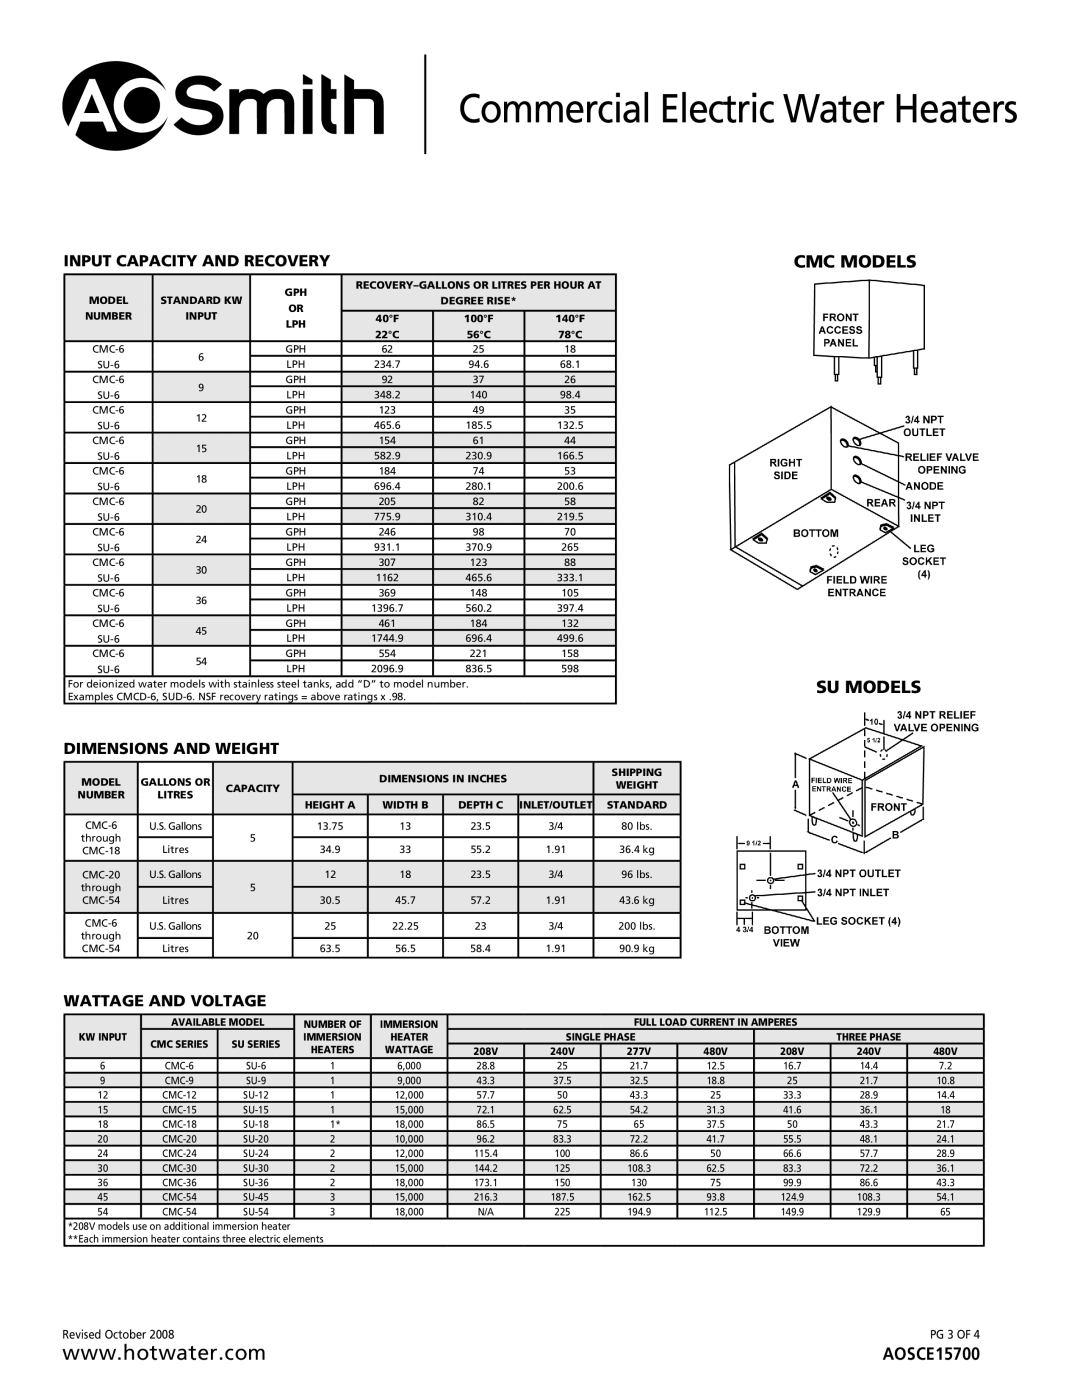 A.O. Smith CMC/SU-54 warranty Input Capacity And Recovery, Dimensions And Weight, Wattage And Voltage, Cmc Models Su Models 